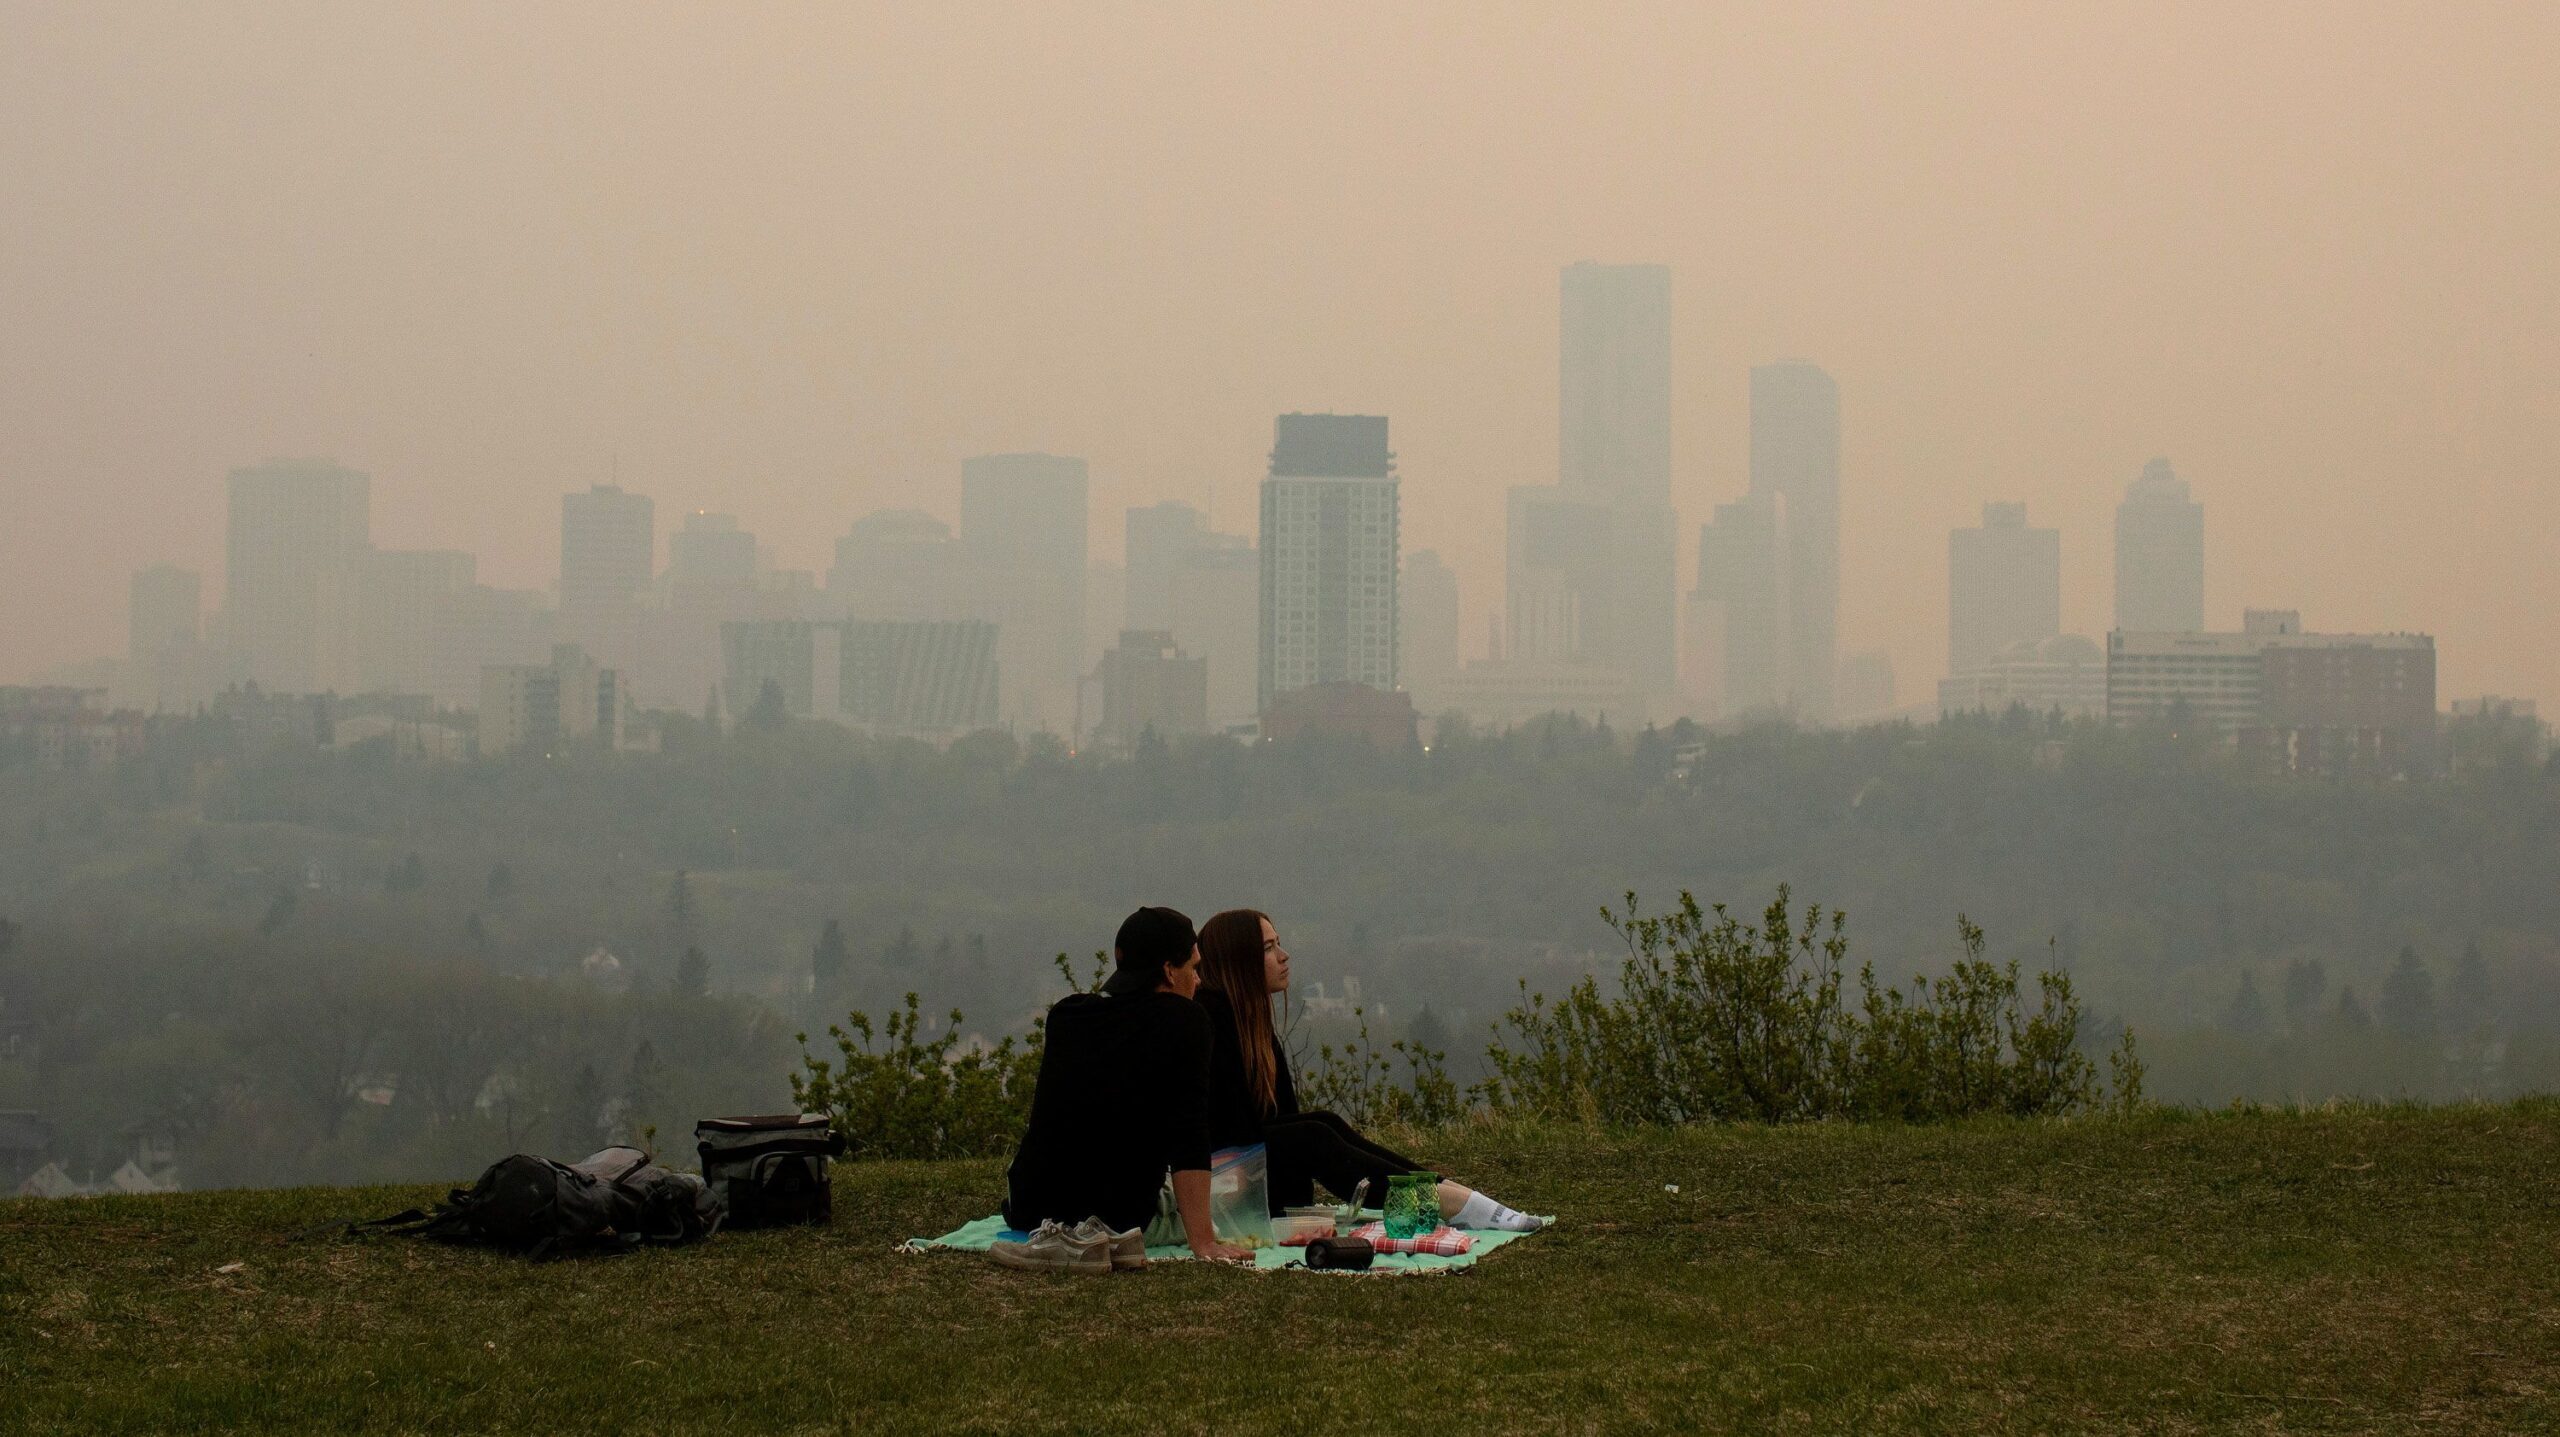 Thousands of Canadians have been forced to evacuate from raging wildfires. Now the smoke is making air quality dangerous [Video]